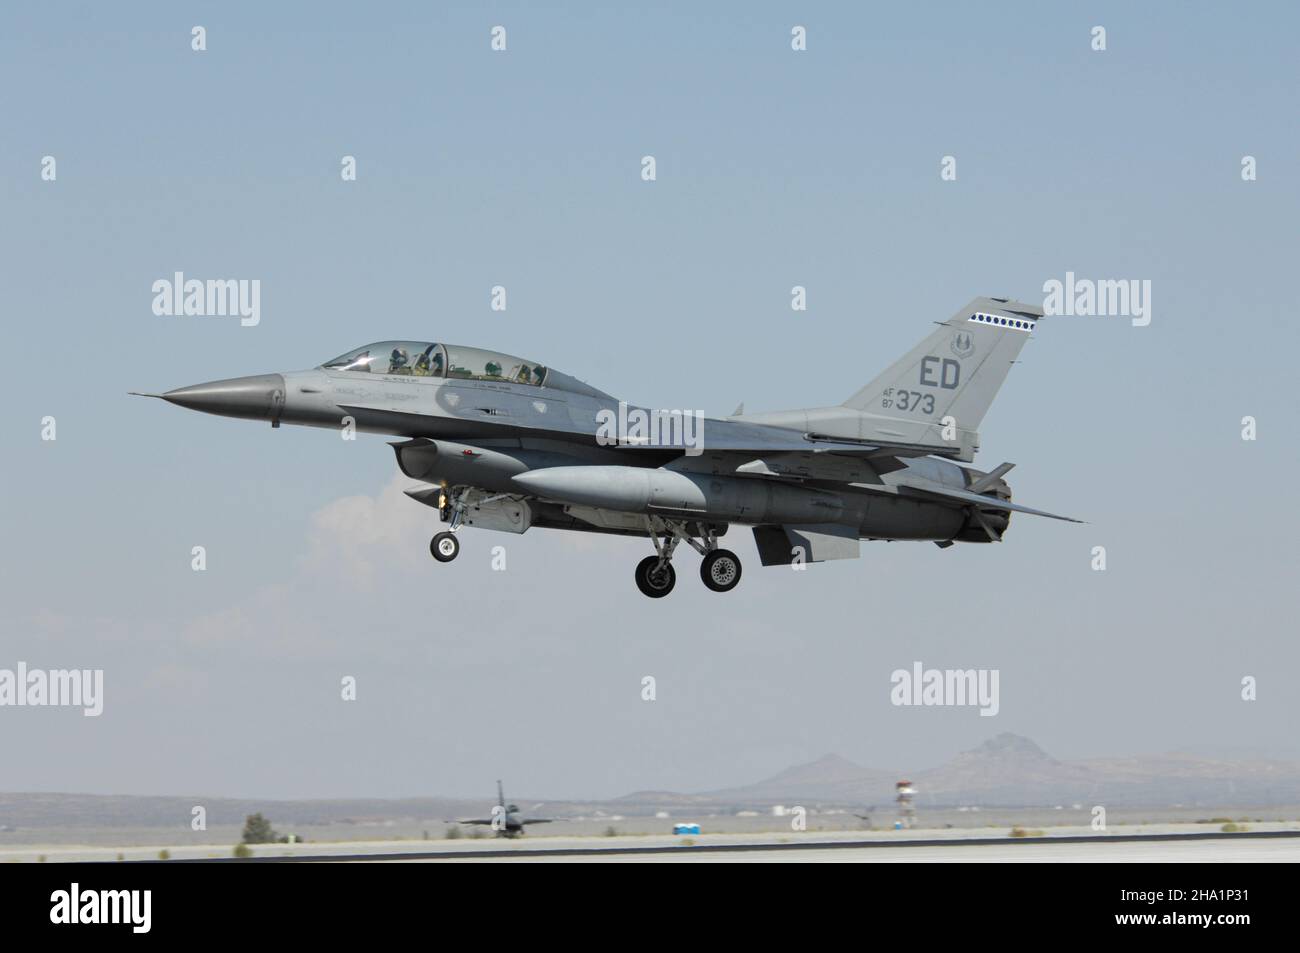 United States Air Force F-16 Fighting Falcon landing at Edwards Air Force Base in the Mojave desert of California Stock Photo